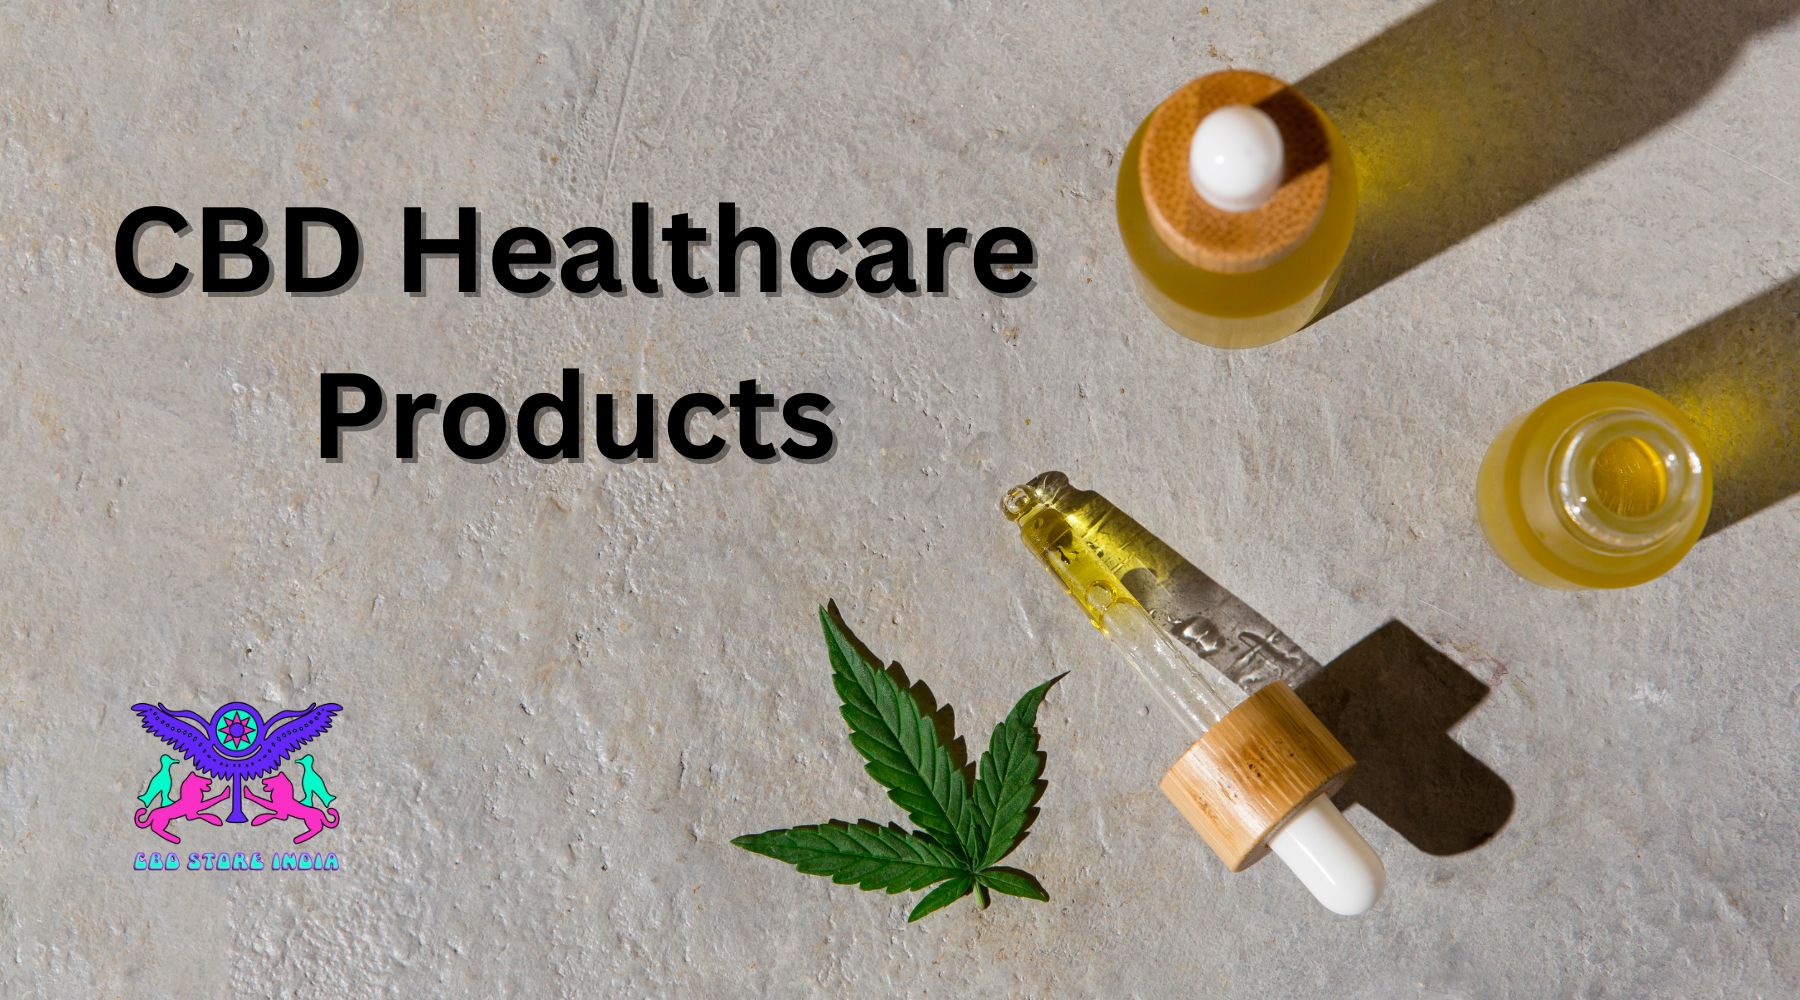 What are different CBD healthcare products and How to Introduce CBD into Your Life? - CBD Store India